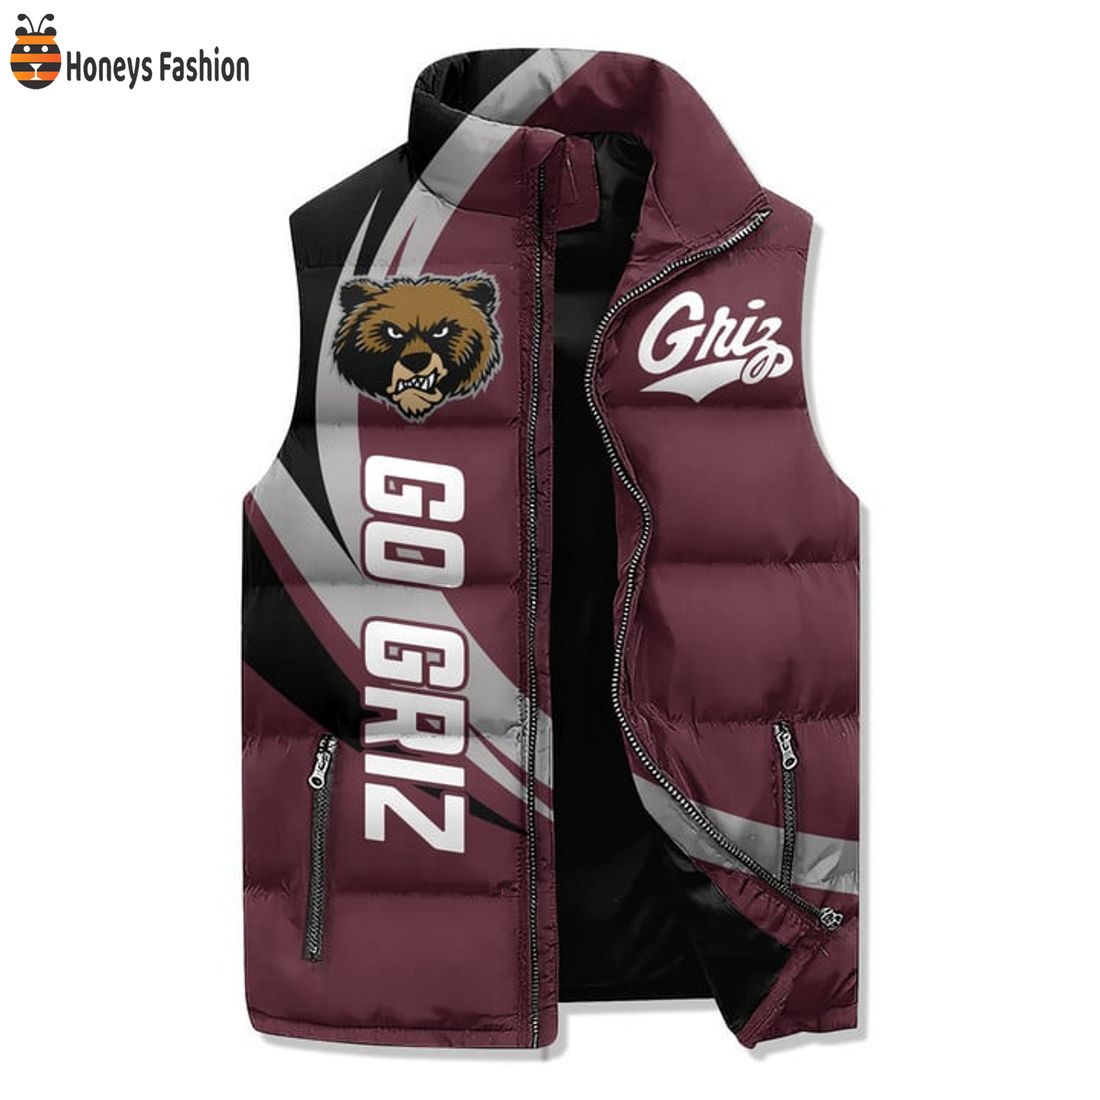 TRENDING Montana Grizzlies Damn Right I’m A Grizzlies Fan Win Or Lose Puffer Sleeveless Jacket